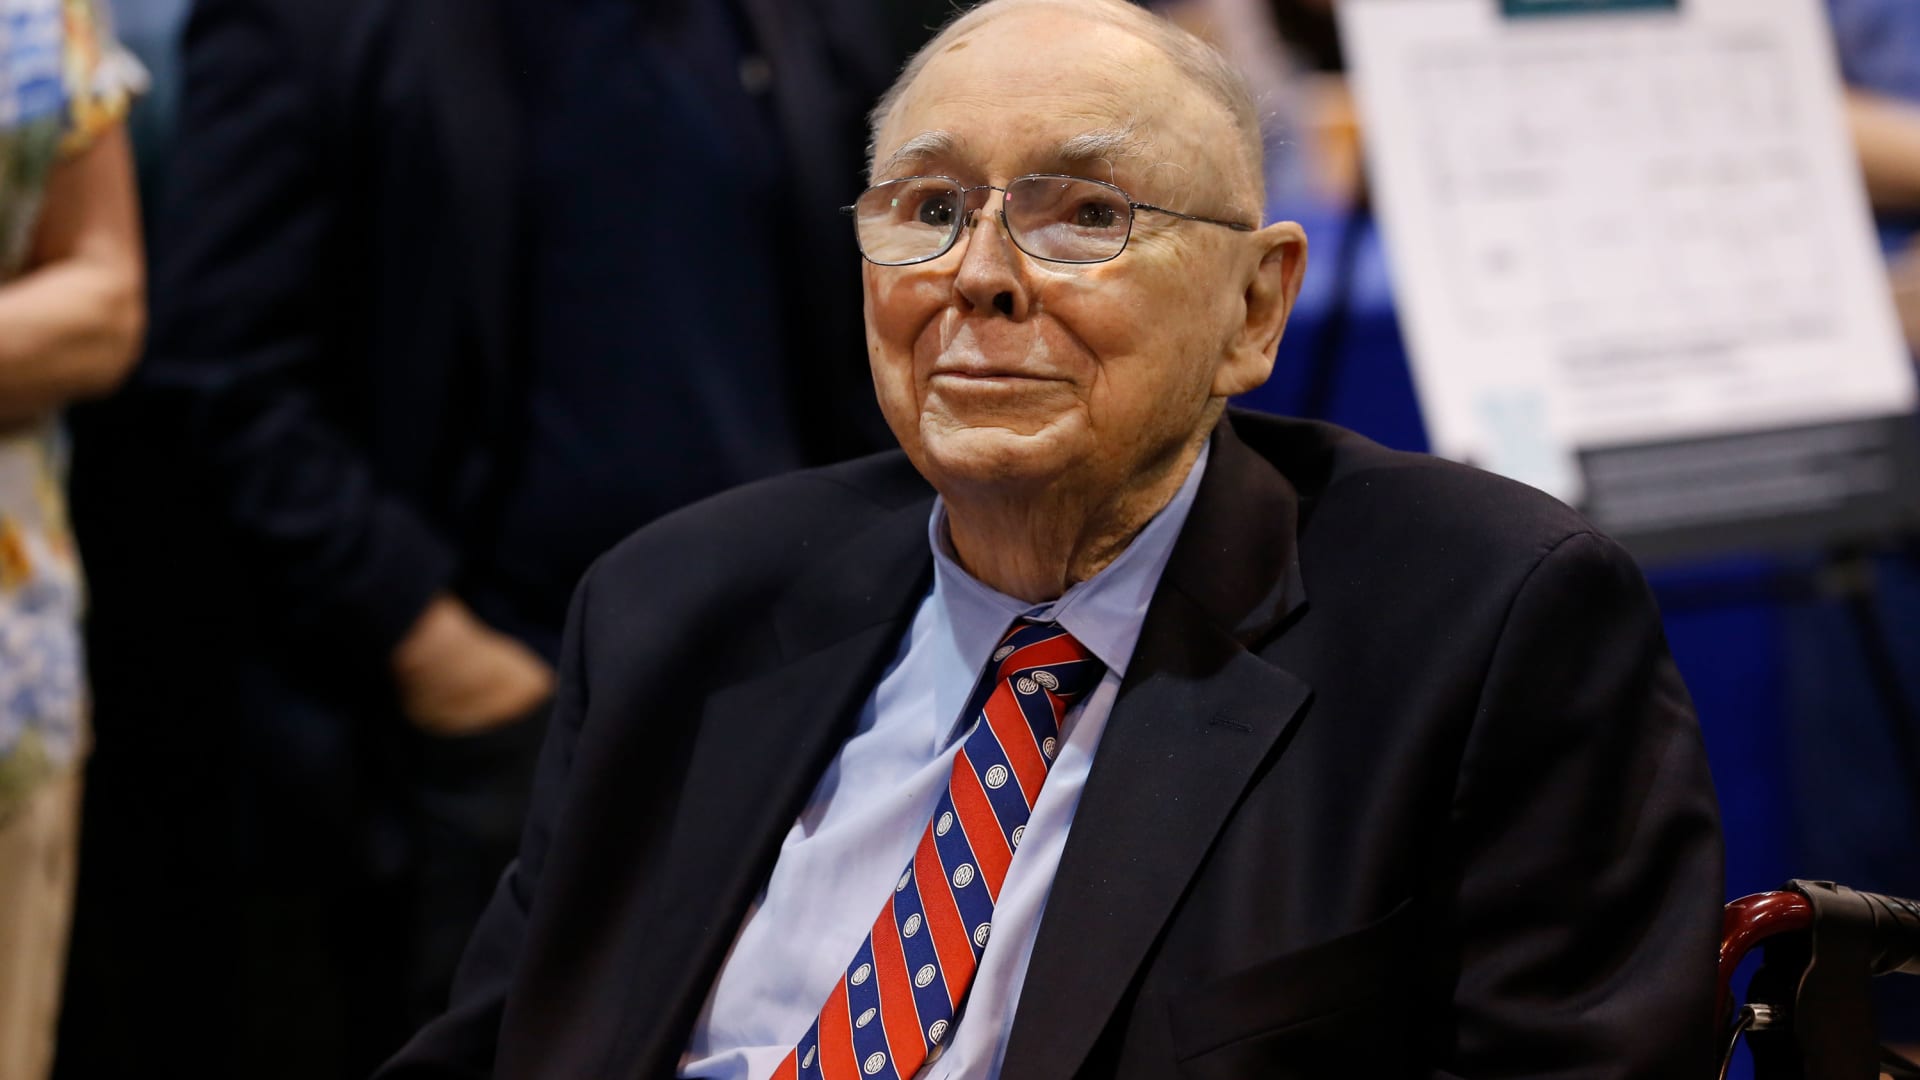 Stop complaining, says billionaire investor Charlie Munger: 'Everybody's five times better off than they used to be'